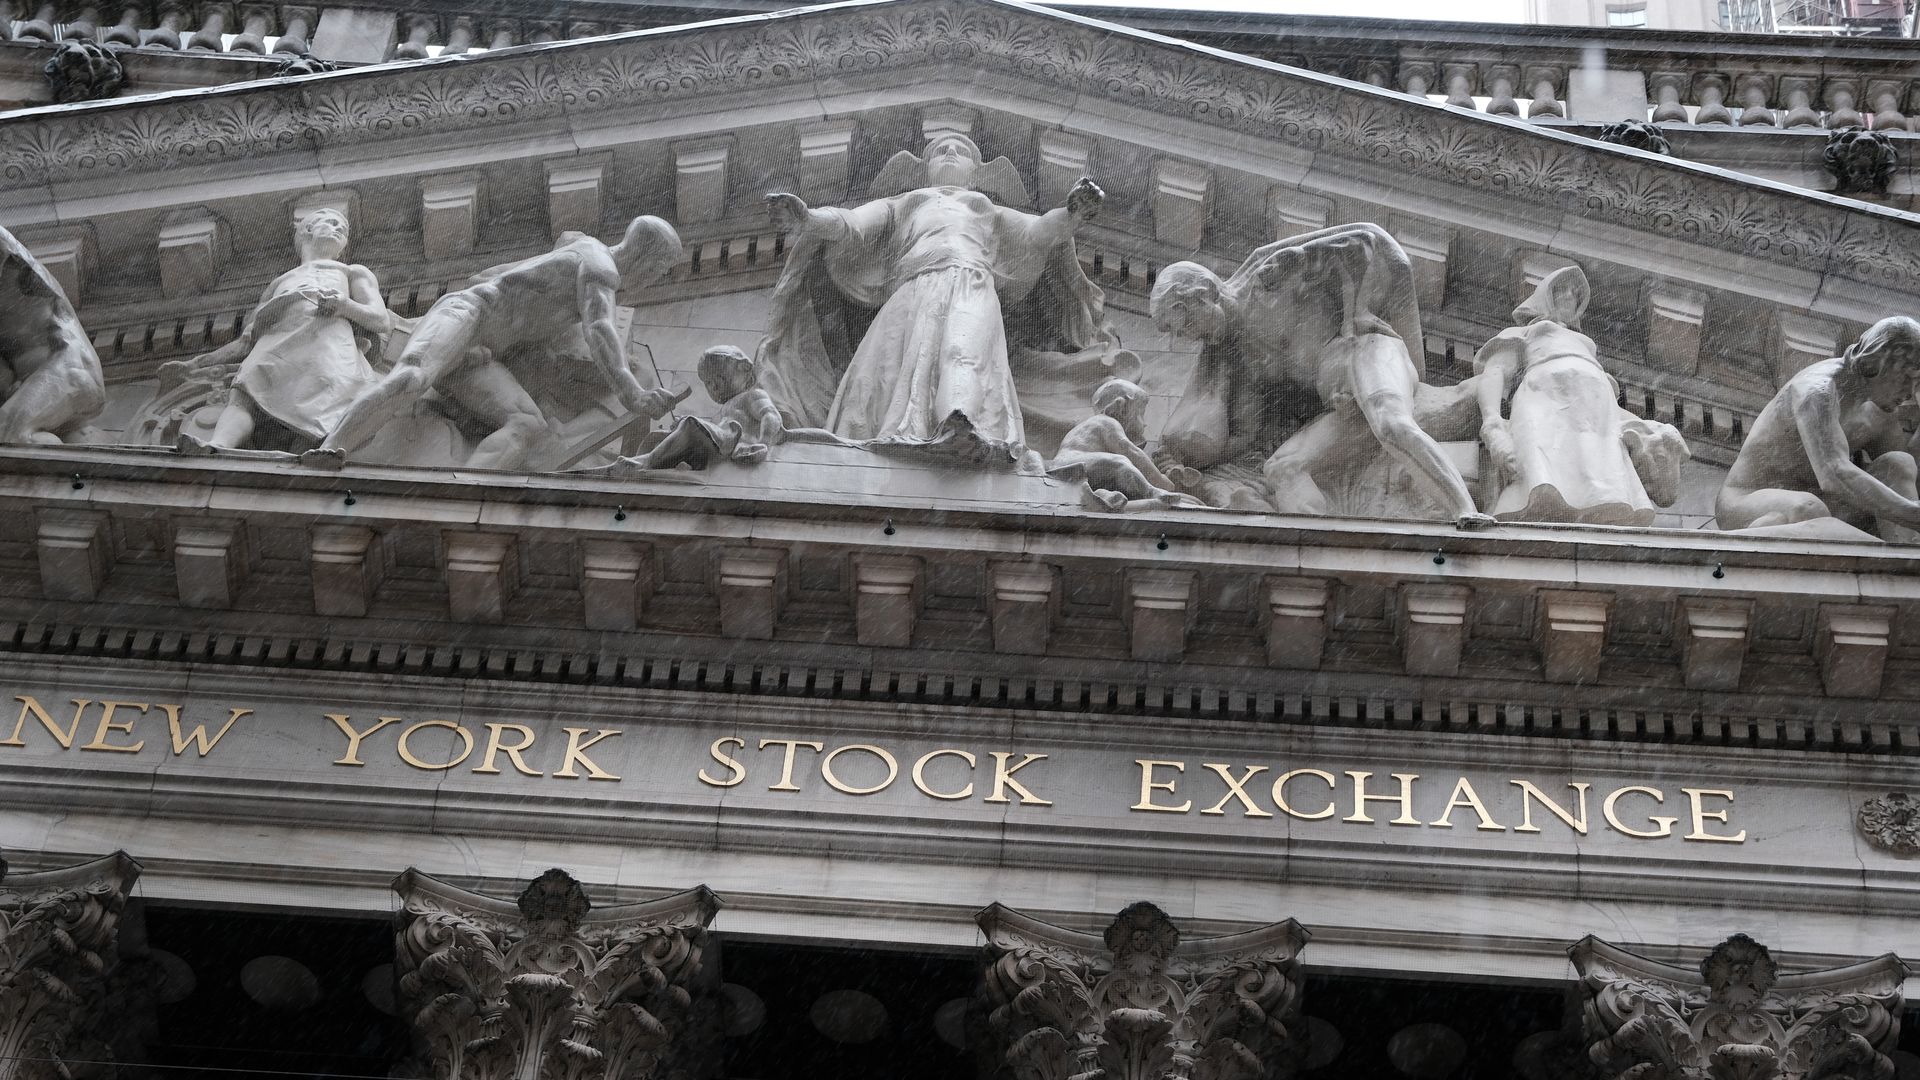 A photo of the New York Stock Exchange.